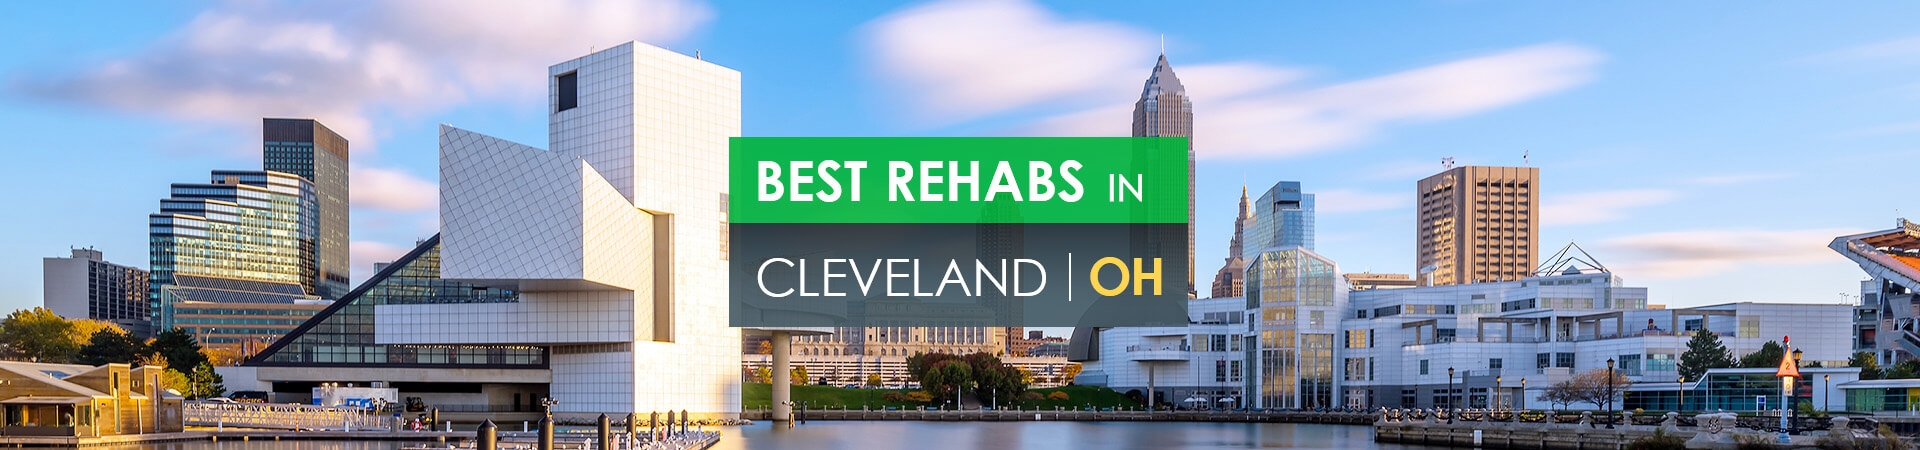 Best rehabs in Cleveland, OH